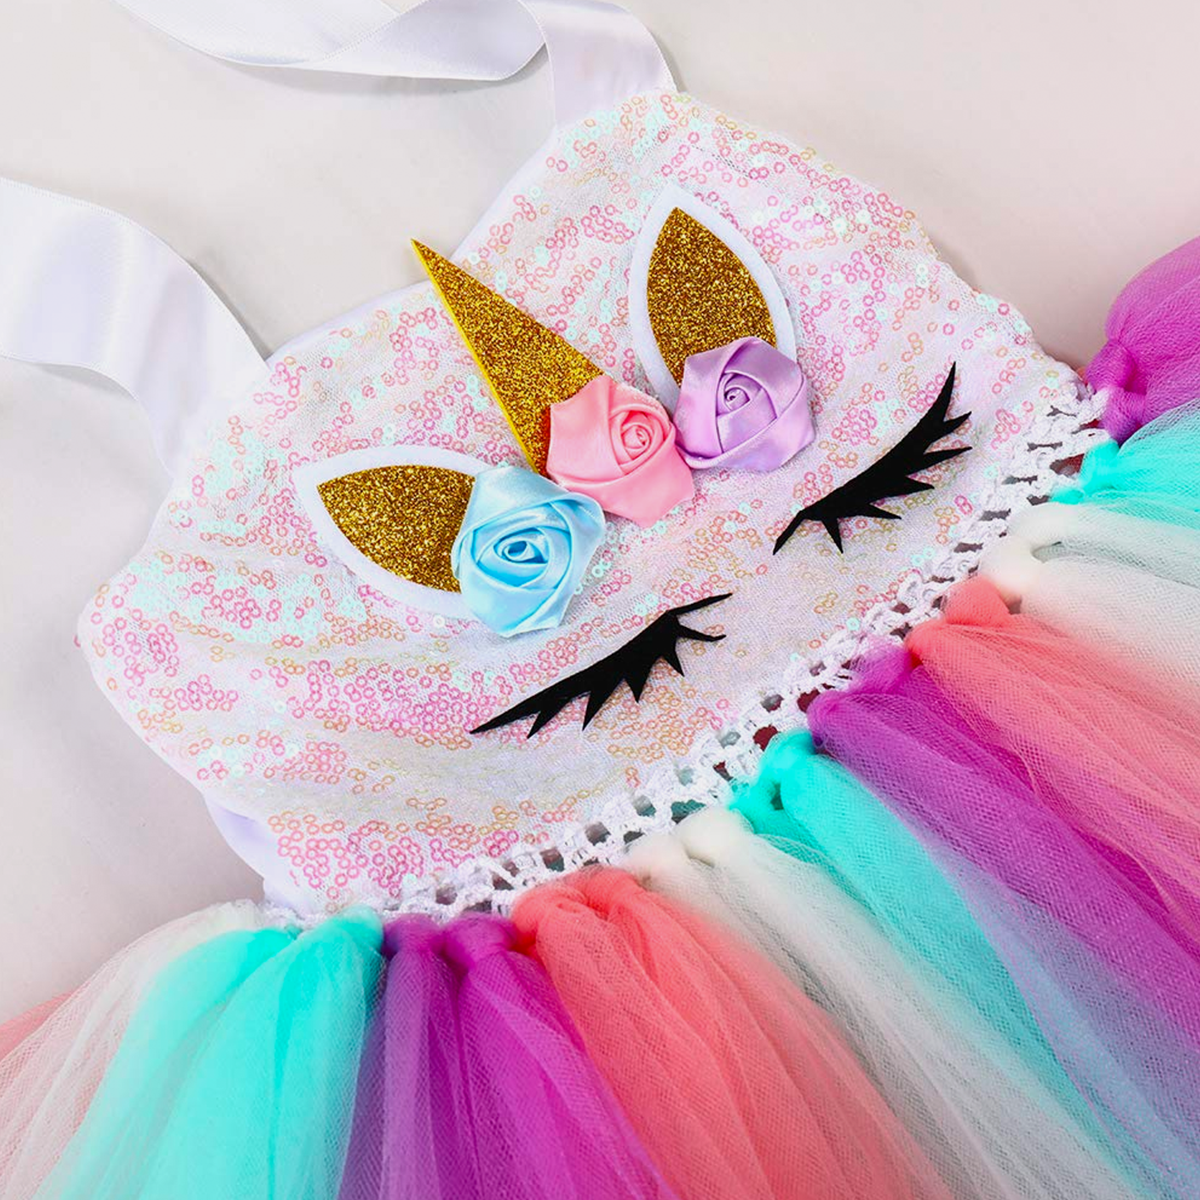 Unicorn Dress Frill Hopscotch Skirt Outfit Tutu Princess Costume With Headband Wings For Baby Girl & Kids (3pc)